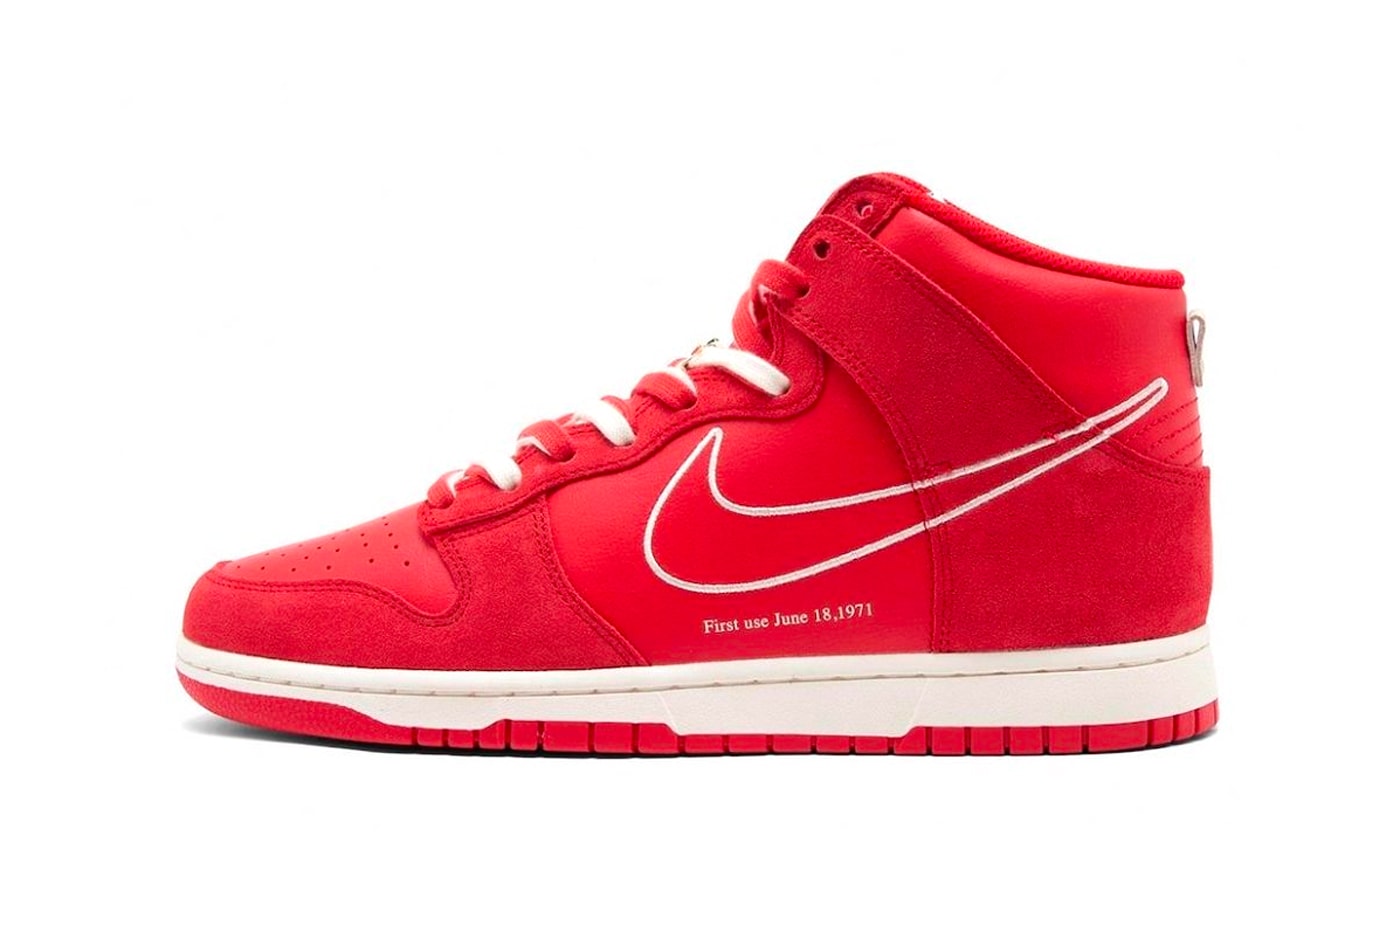 Nike Dunk High First Use University Red Carolyn Davidson Sportswear Release New Release Date Buy Price